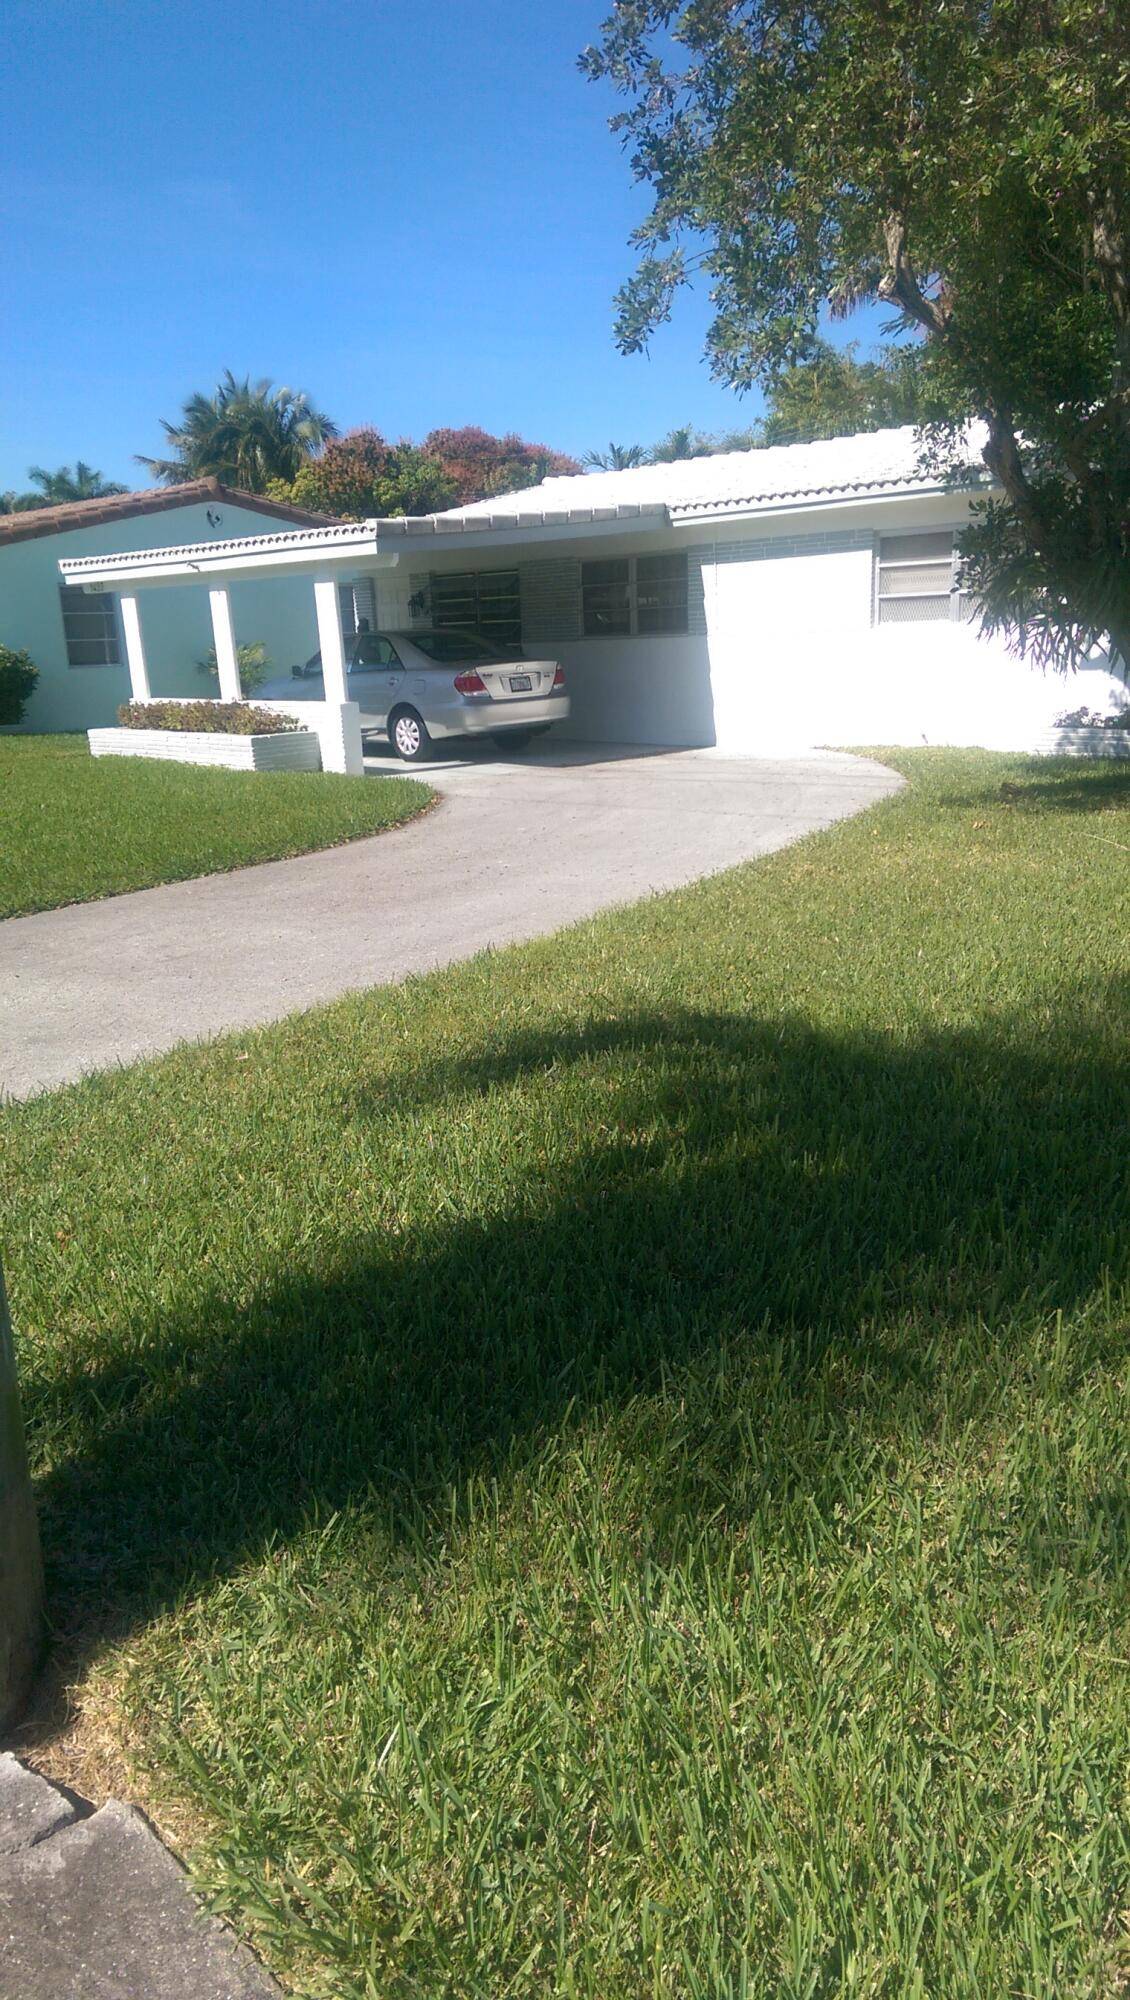 LOCATION LOCATION LOCATION ORIGINAL OWNER UPDATED DESIGNER DETAILED HOME WITH OVER SIZED BACK YARD PLENTY OF ROOM FOR A ISLAND STYLE INGROUND SWIMMING POOL SHORT WALK TO HOLLYWOOD BEACH.